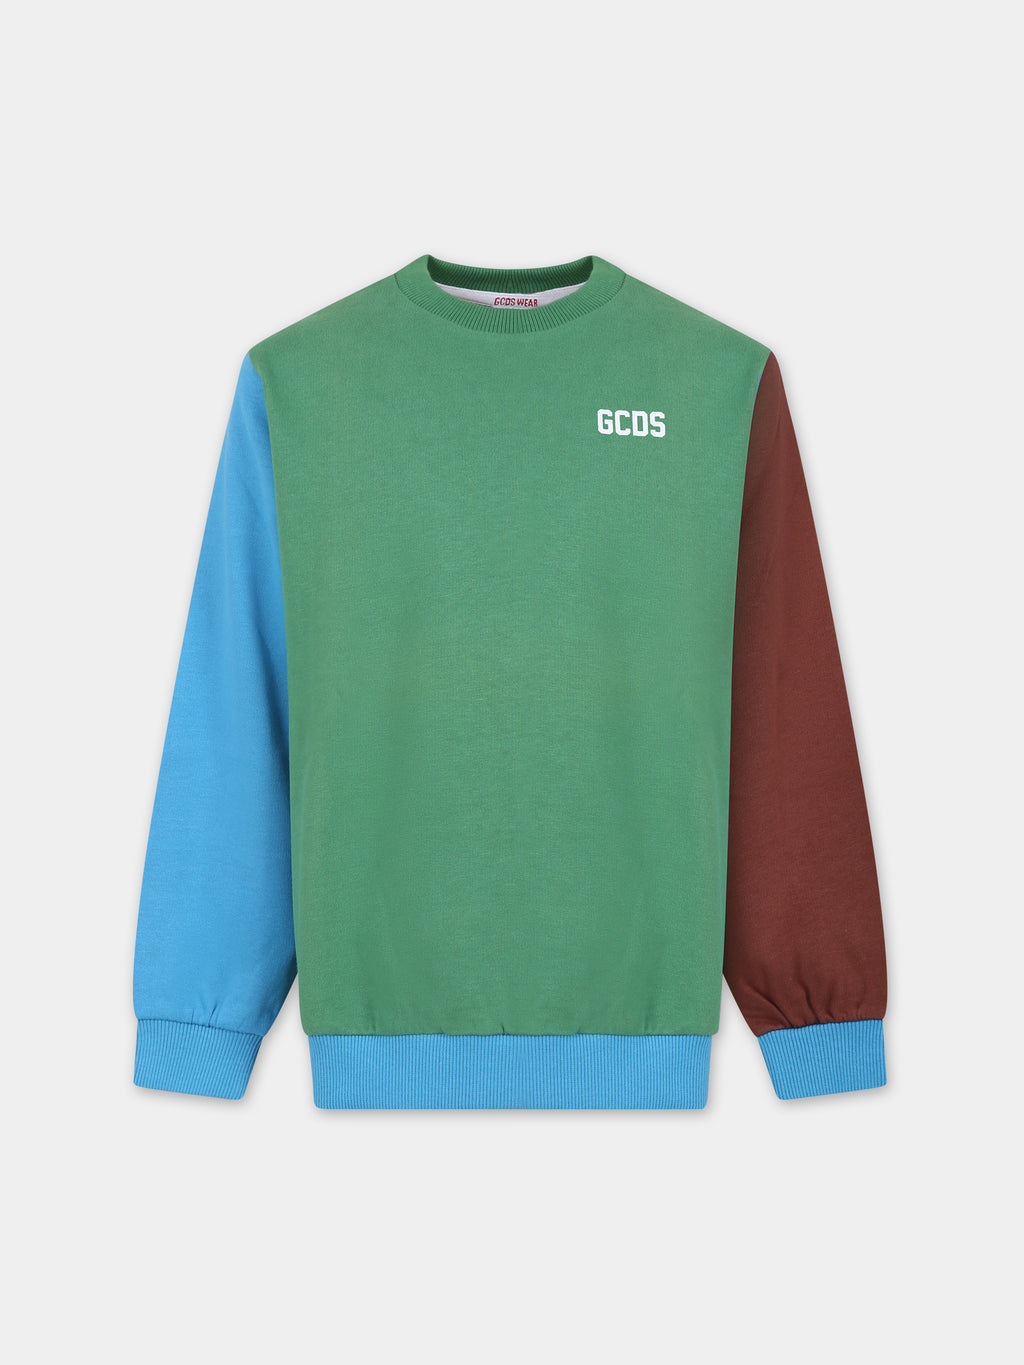 Sweatshirt for kids with logo on the back